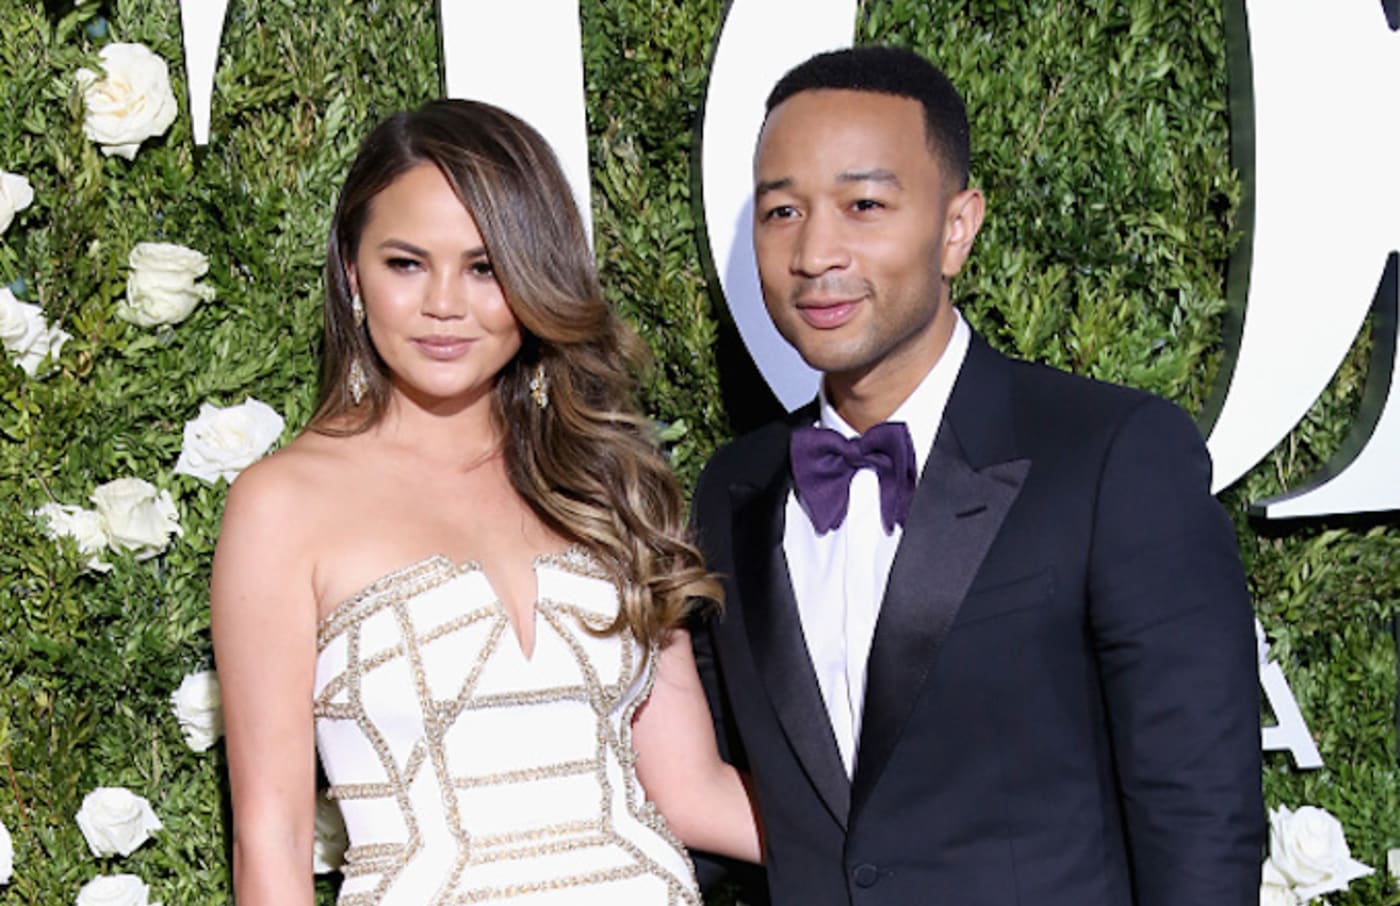 Chrissy Teigen and John Legend attend the 71st Annual Tony Awards